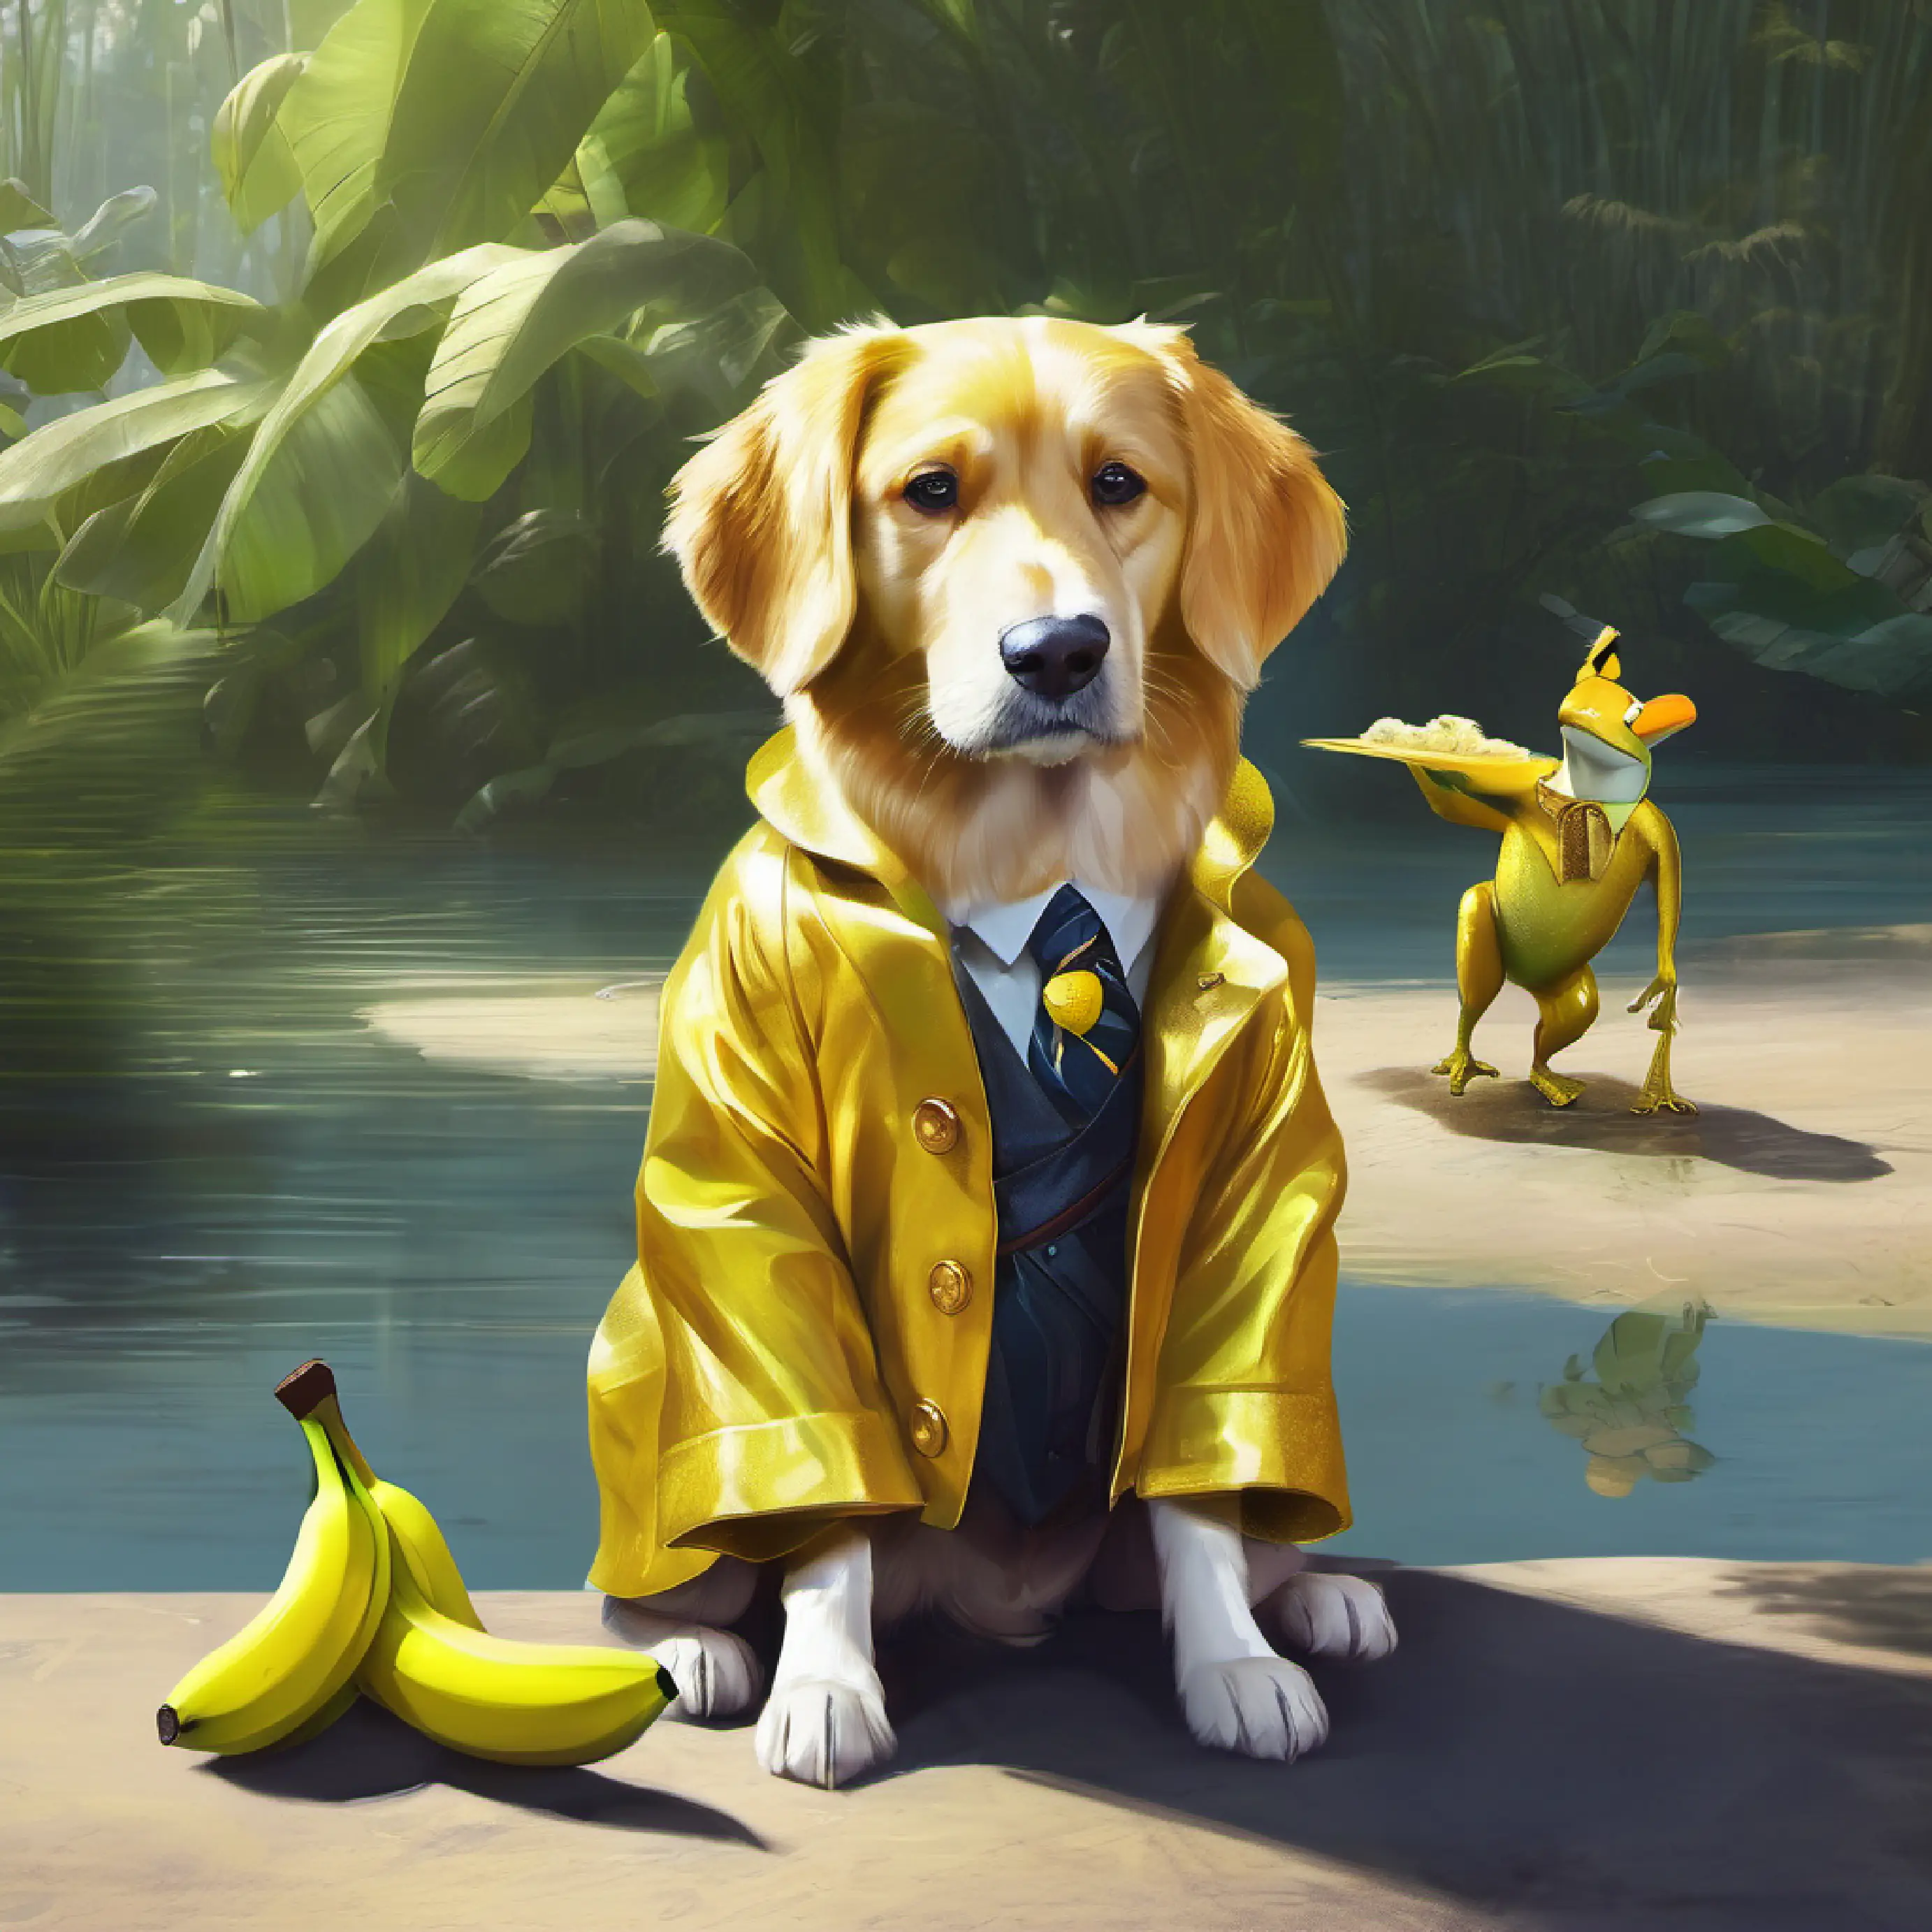 Golden coat, loves bananas, smart dog interacts with frogs but keeps them safe.